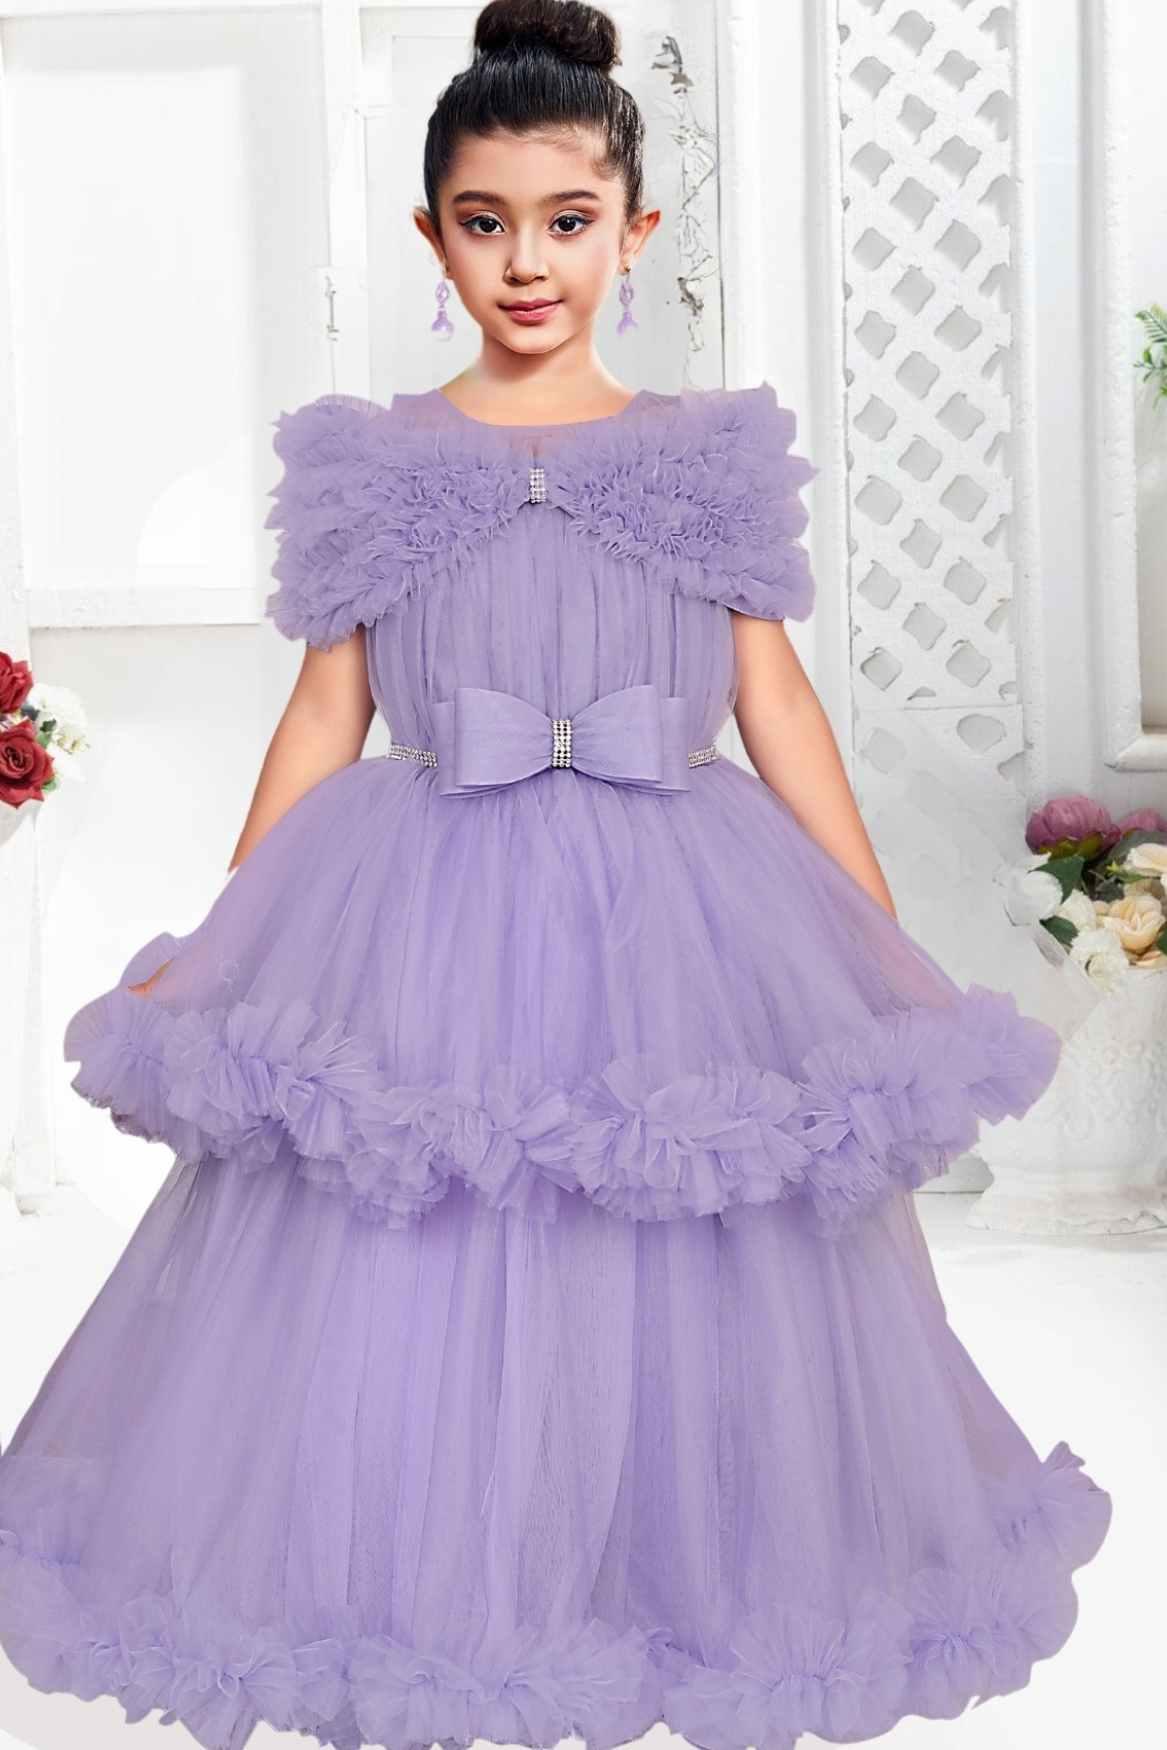 Lavender Net Gown With Ruffled Sleeves For Girls - Lagorii Kids